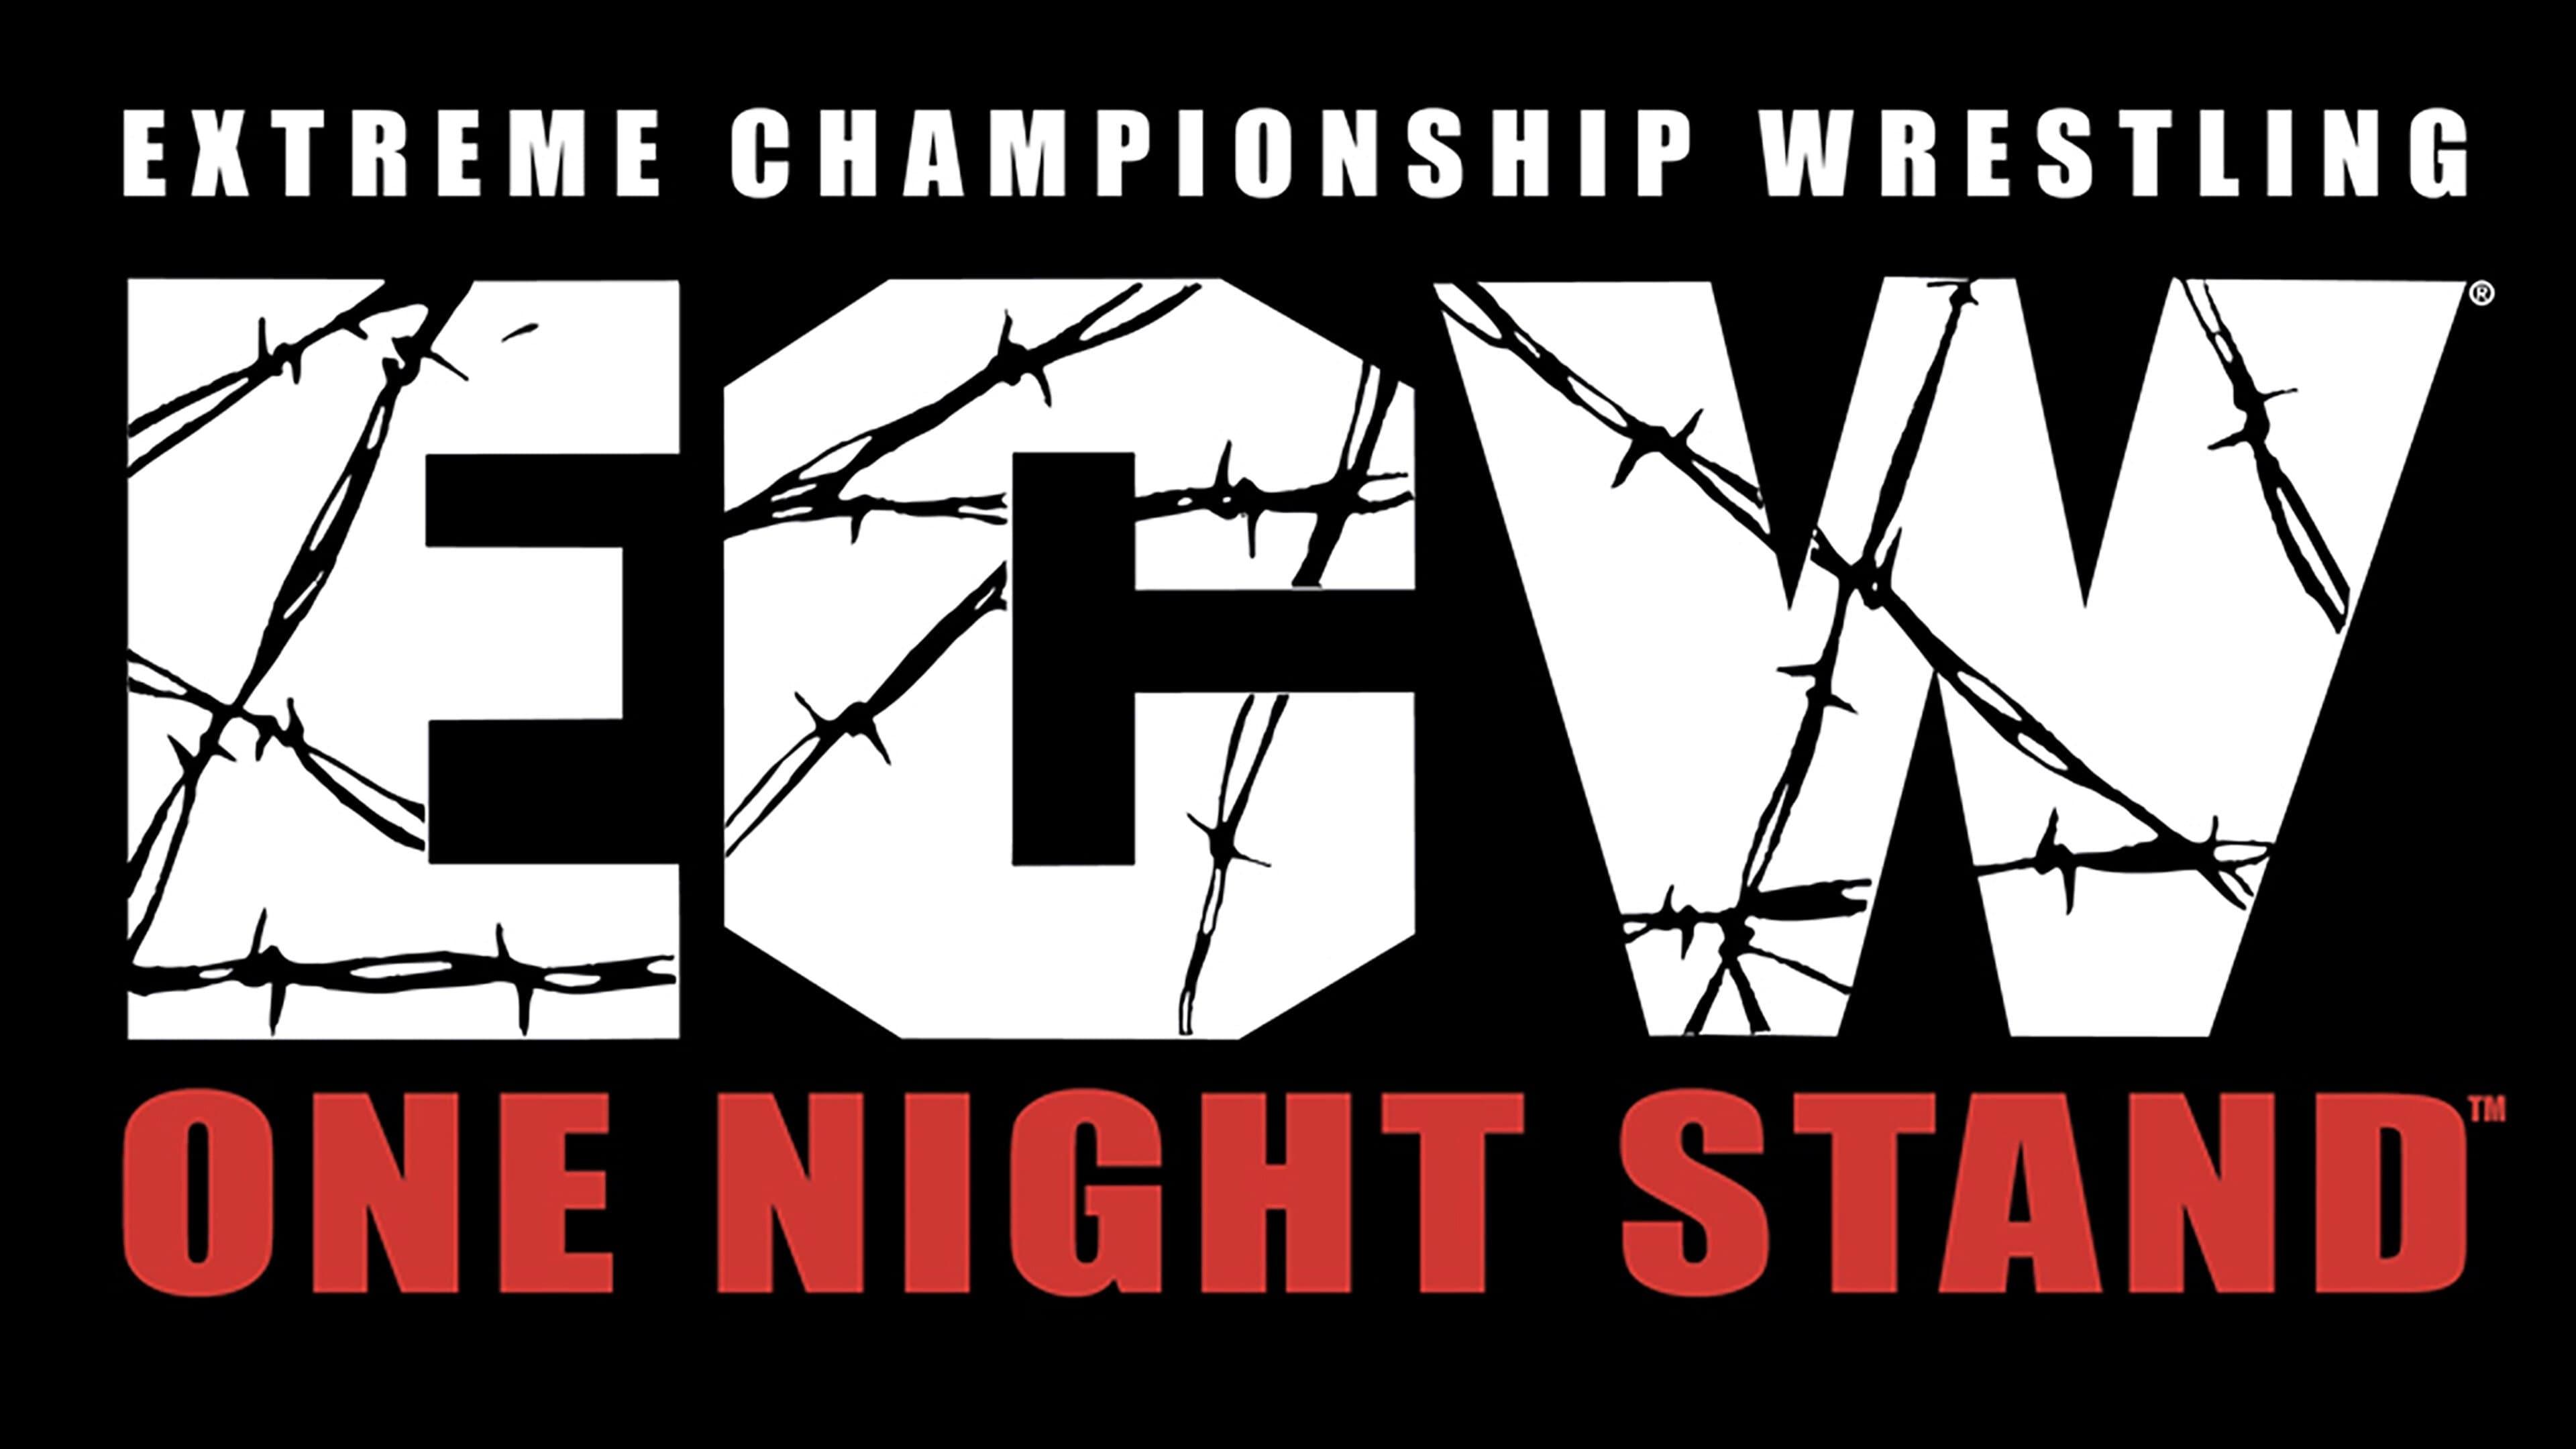 ECW One Night Stand 2005 backdrop